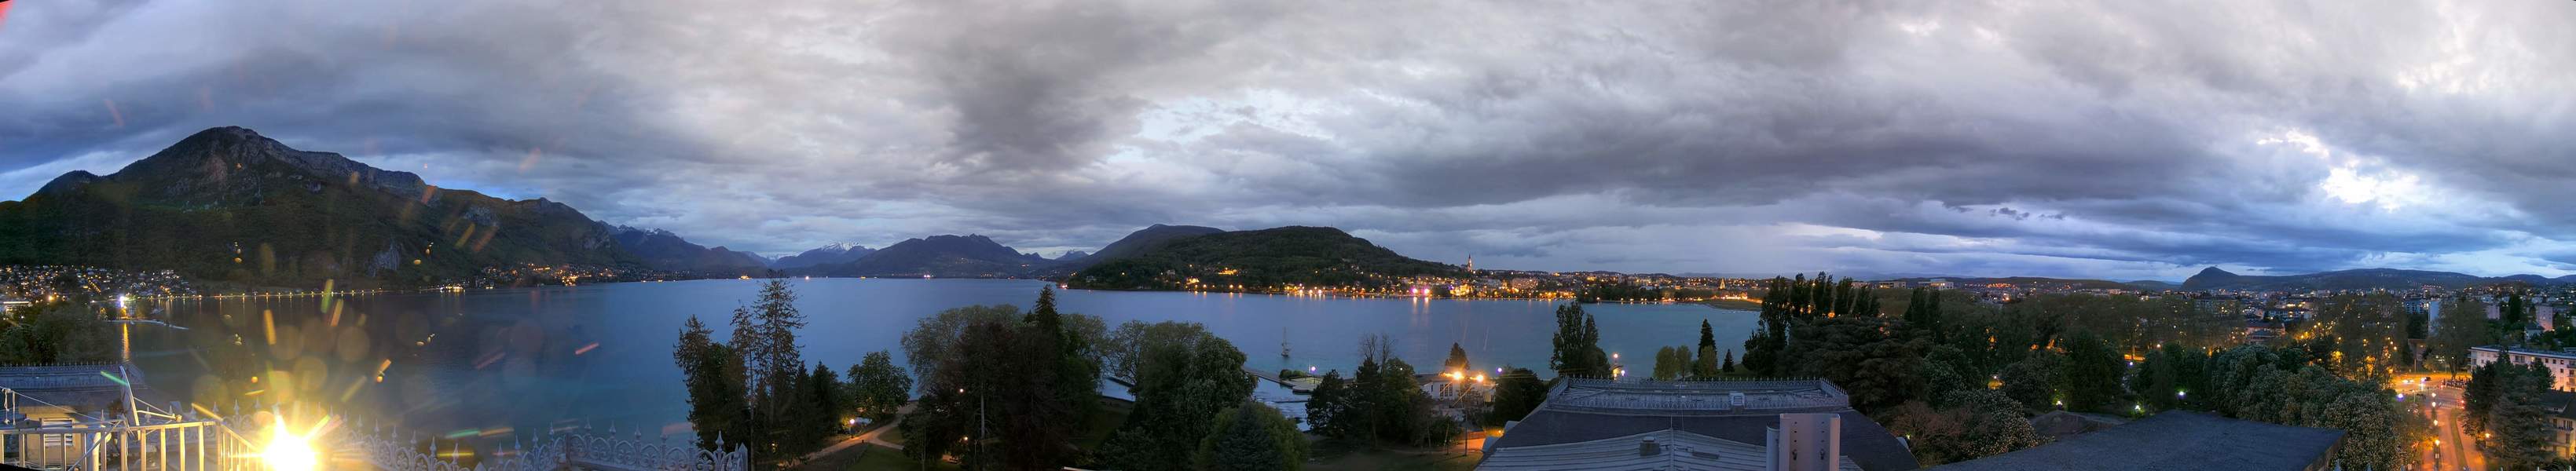 Webcam Annecy